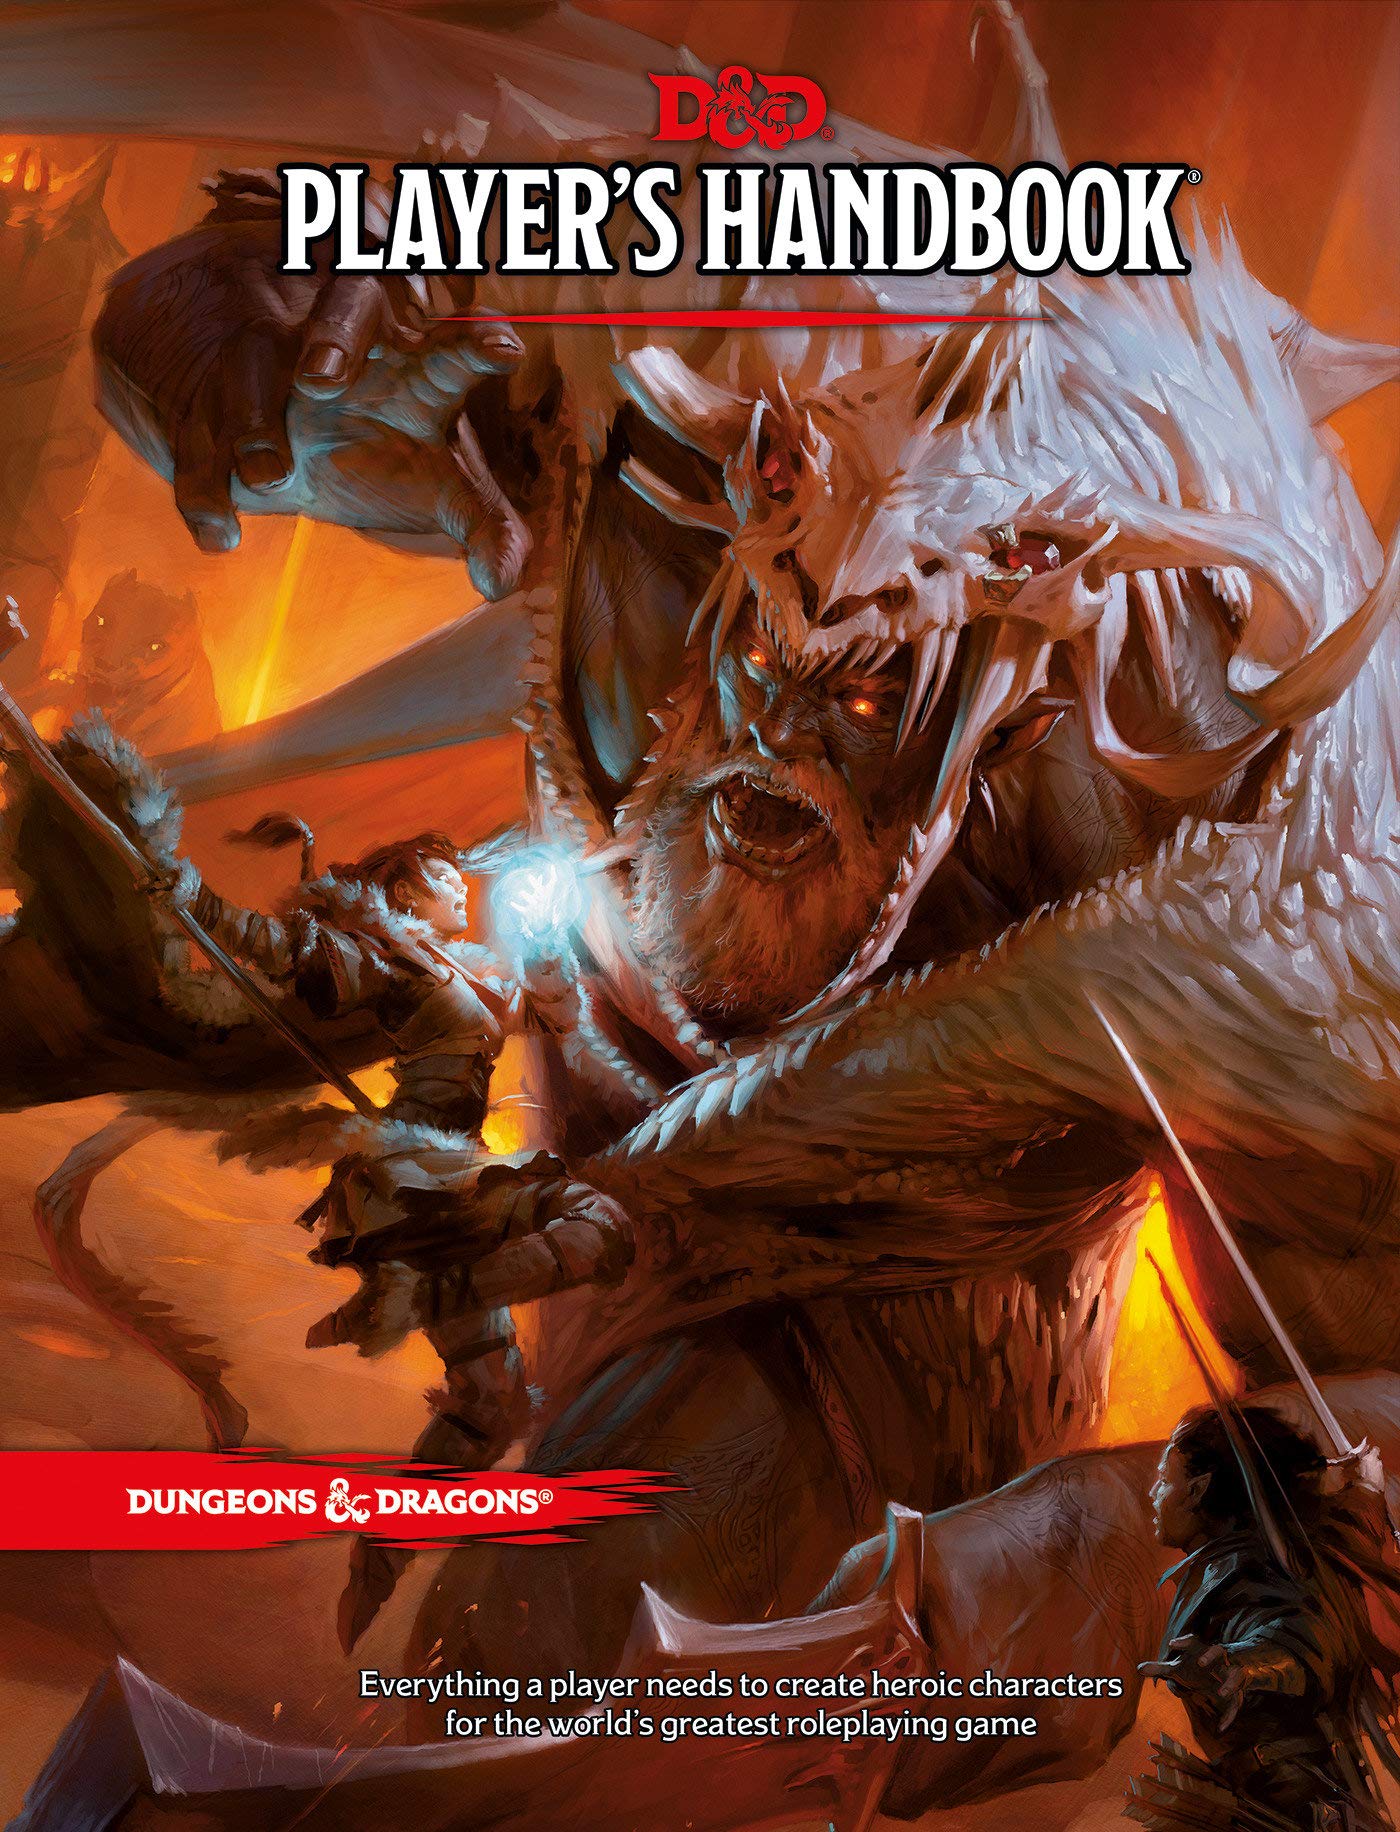 Dungeons & Dragons: Player's Handbook (5th Edition) - Gamescape